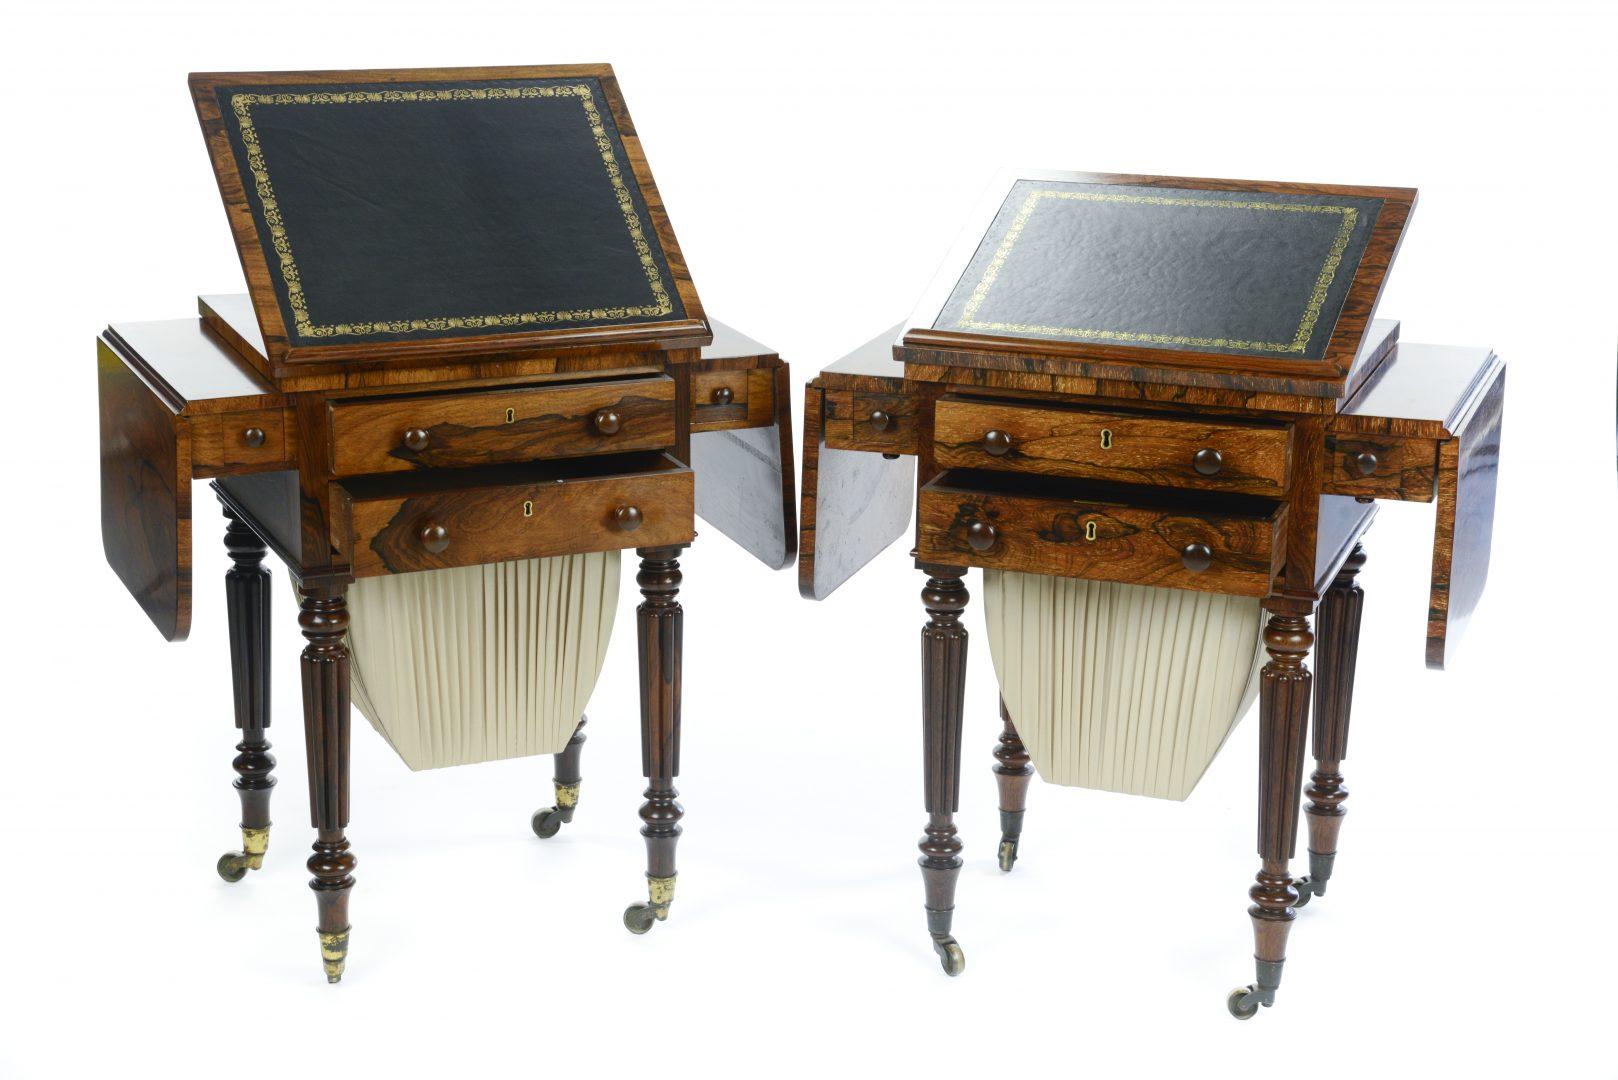 British Gillows of London and Lancaster a Matched Pair of Rosewood Worktables